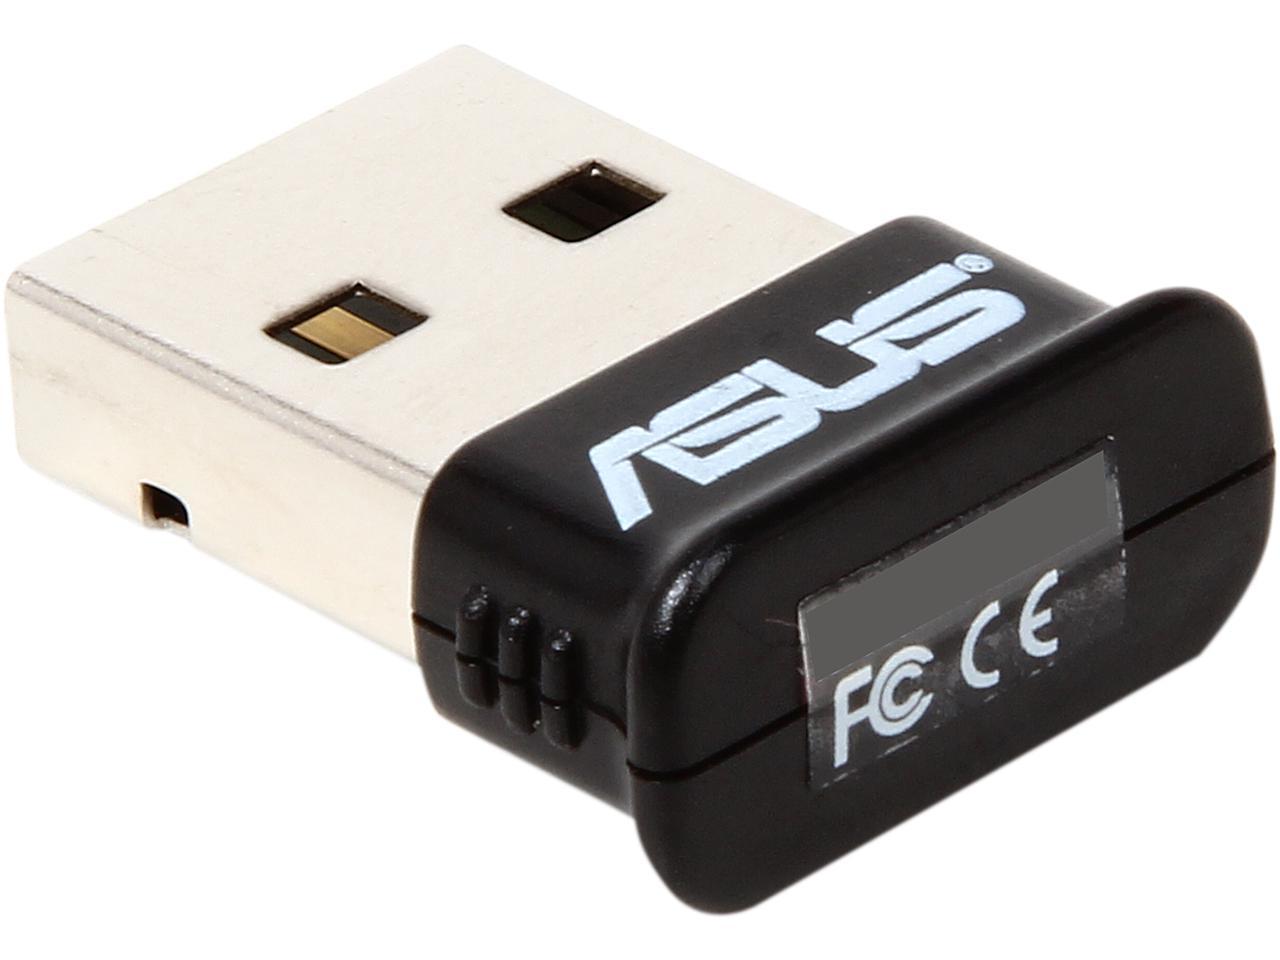 how to pair a new device with asus usb bt400